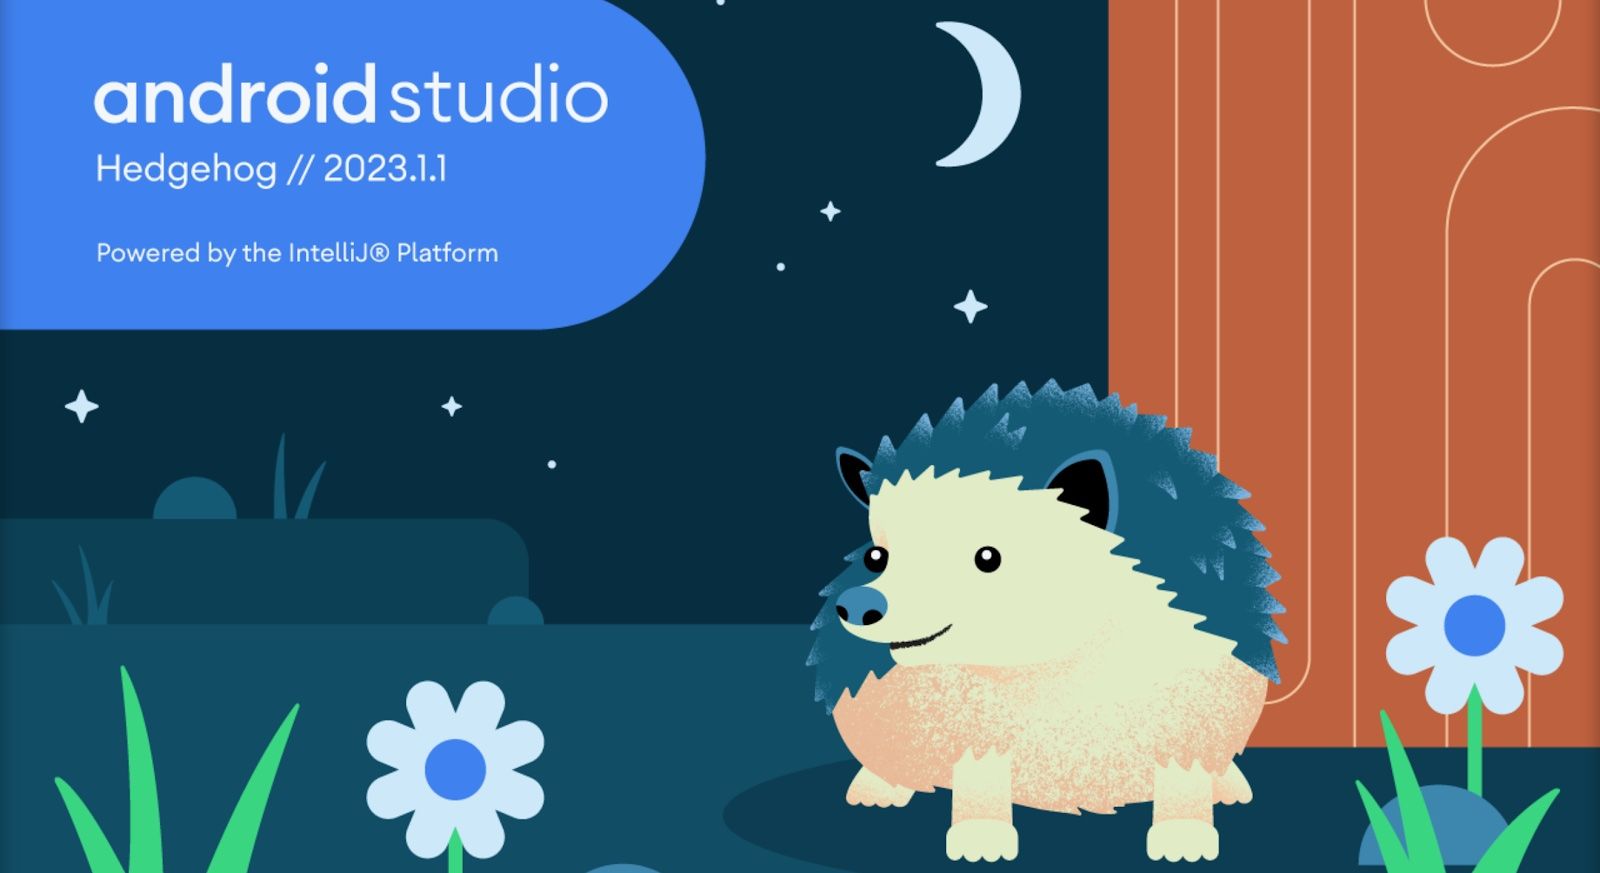 Android Studio Hedgehog is here to help polish apps for Android 14